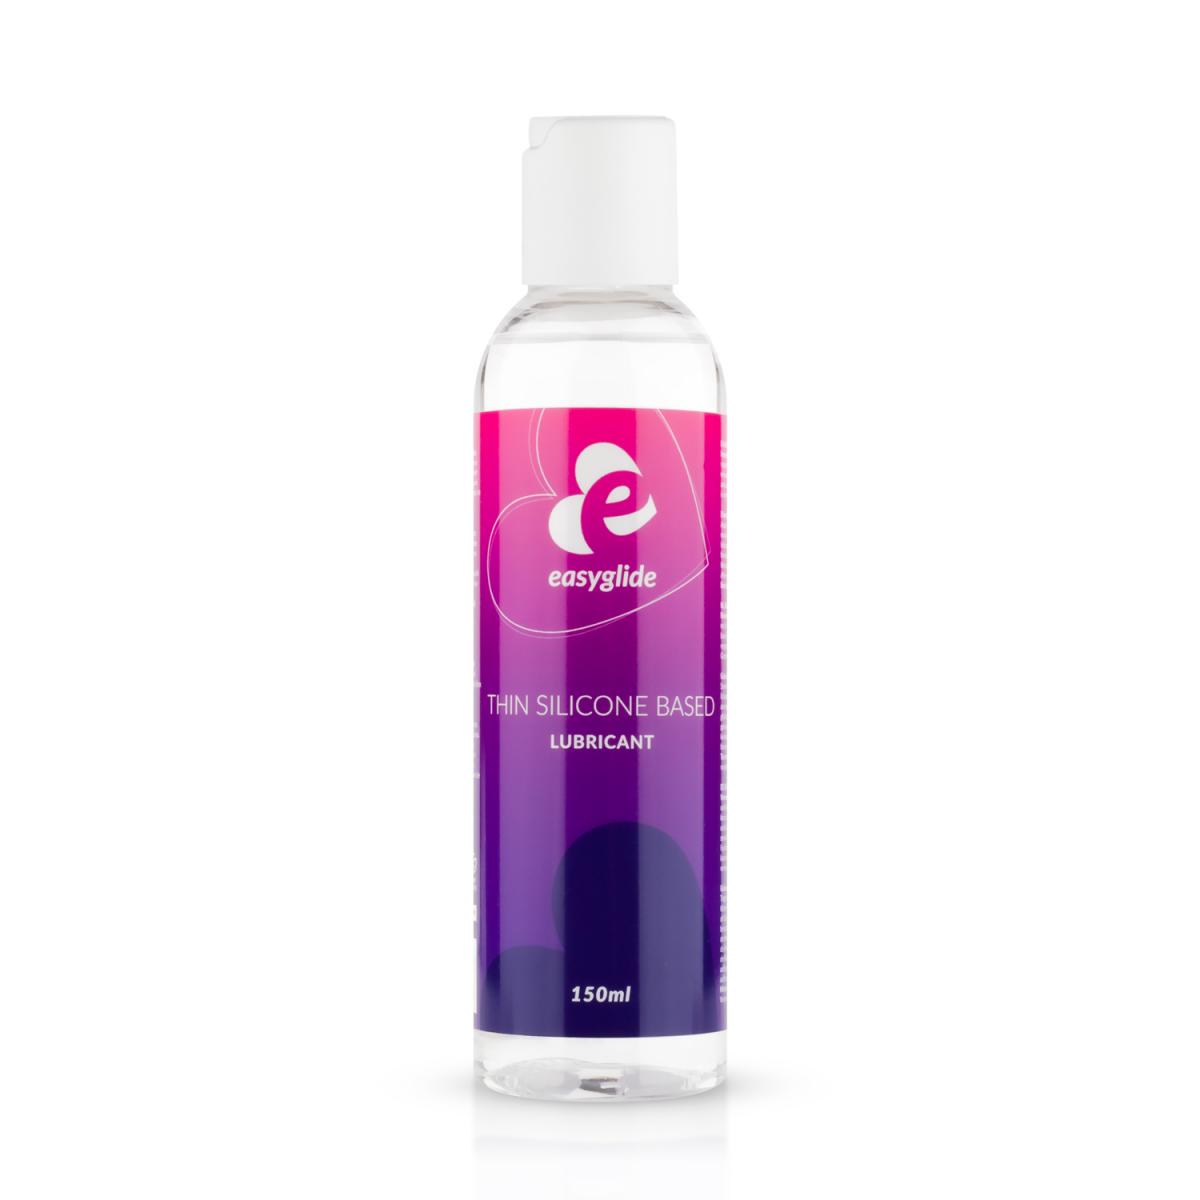 лубрикант easyglide - silicone-based extra thin lubricant